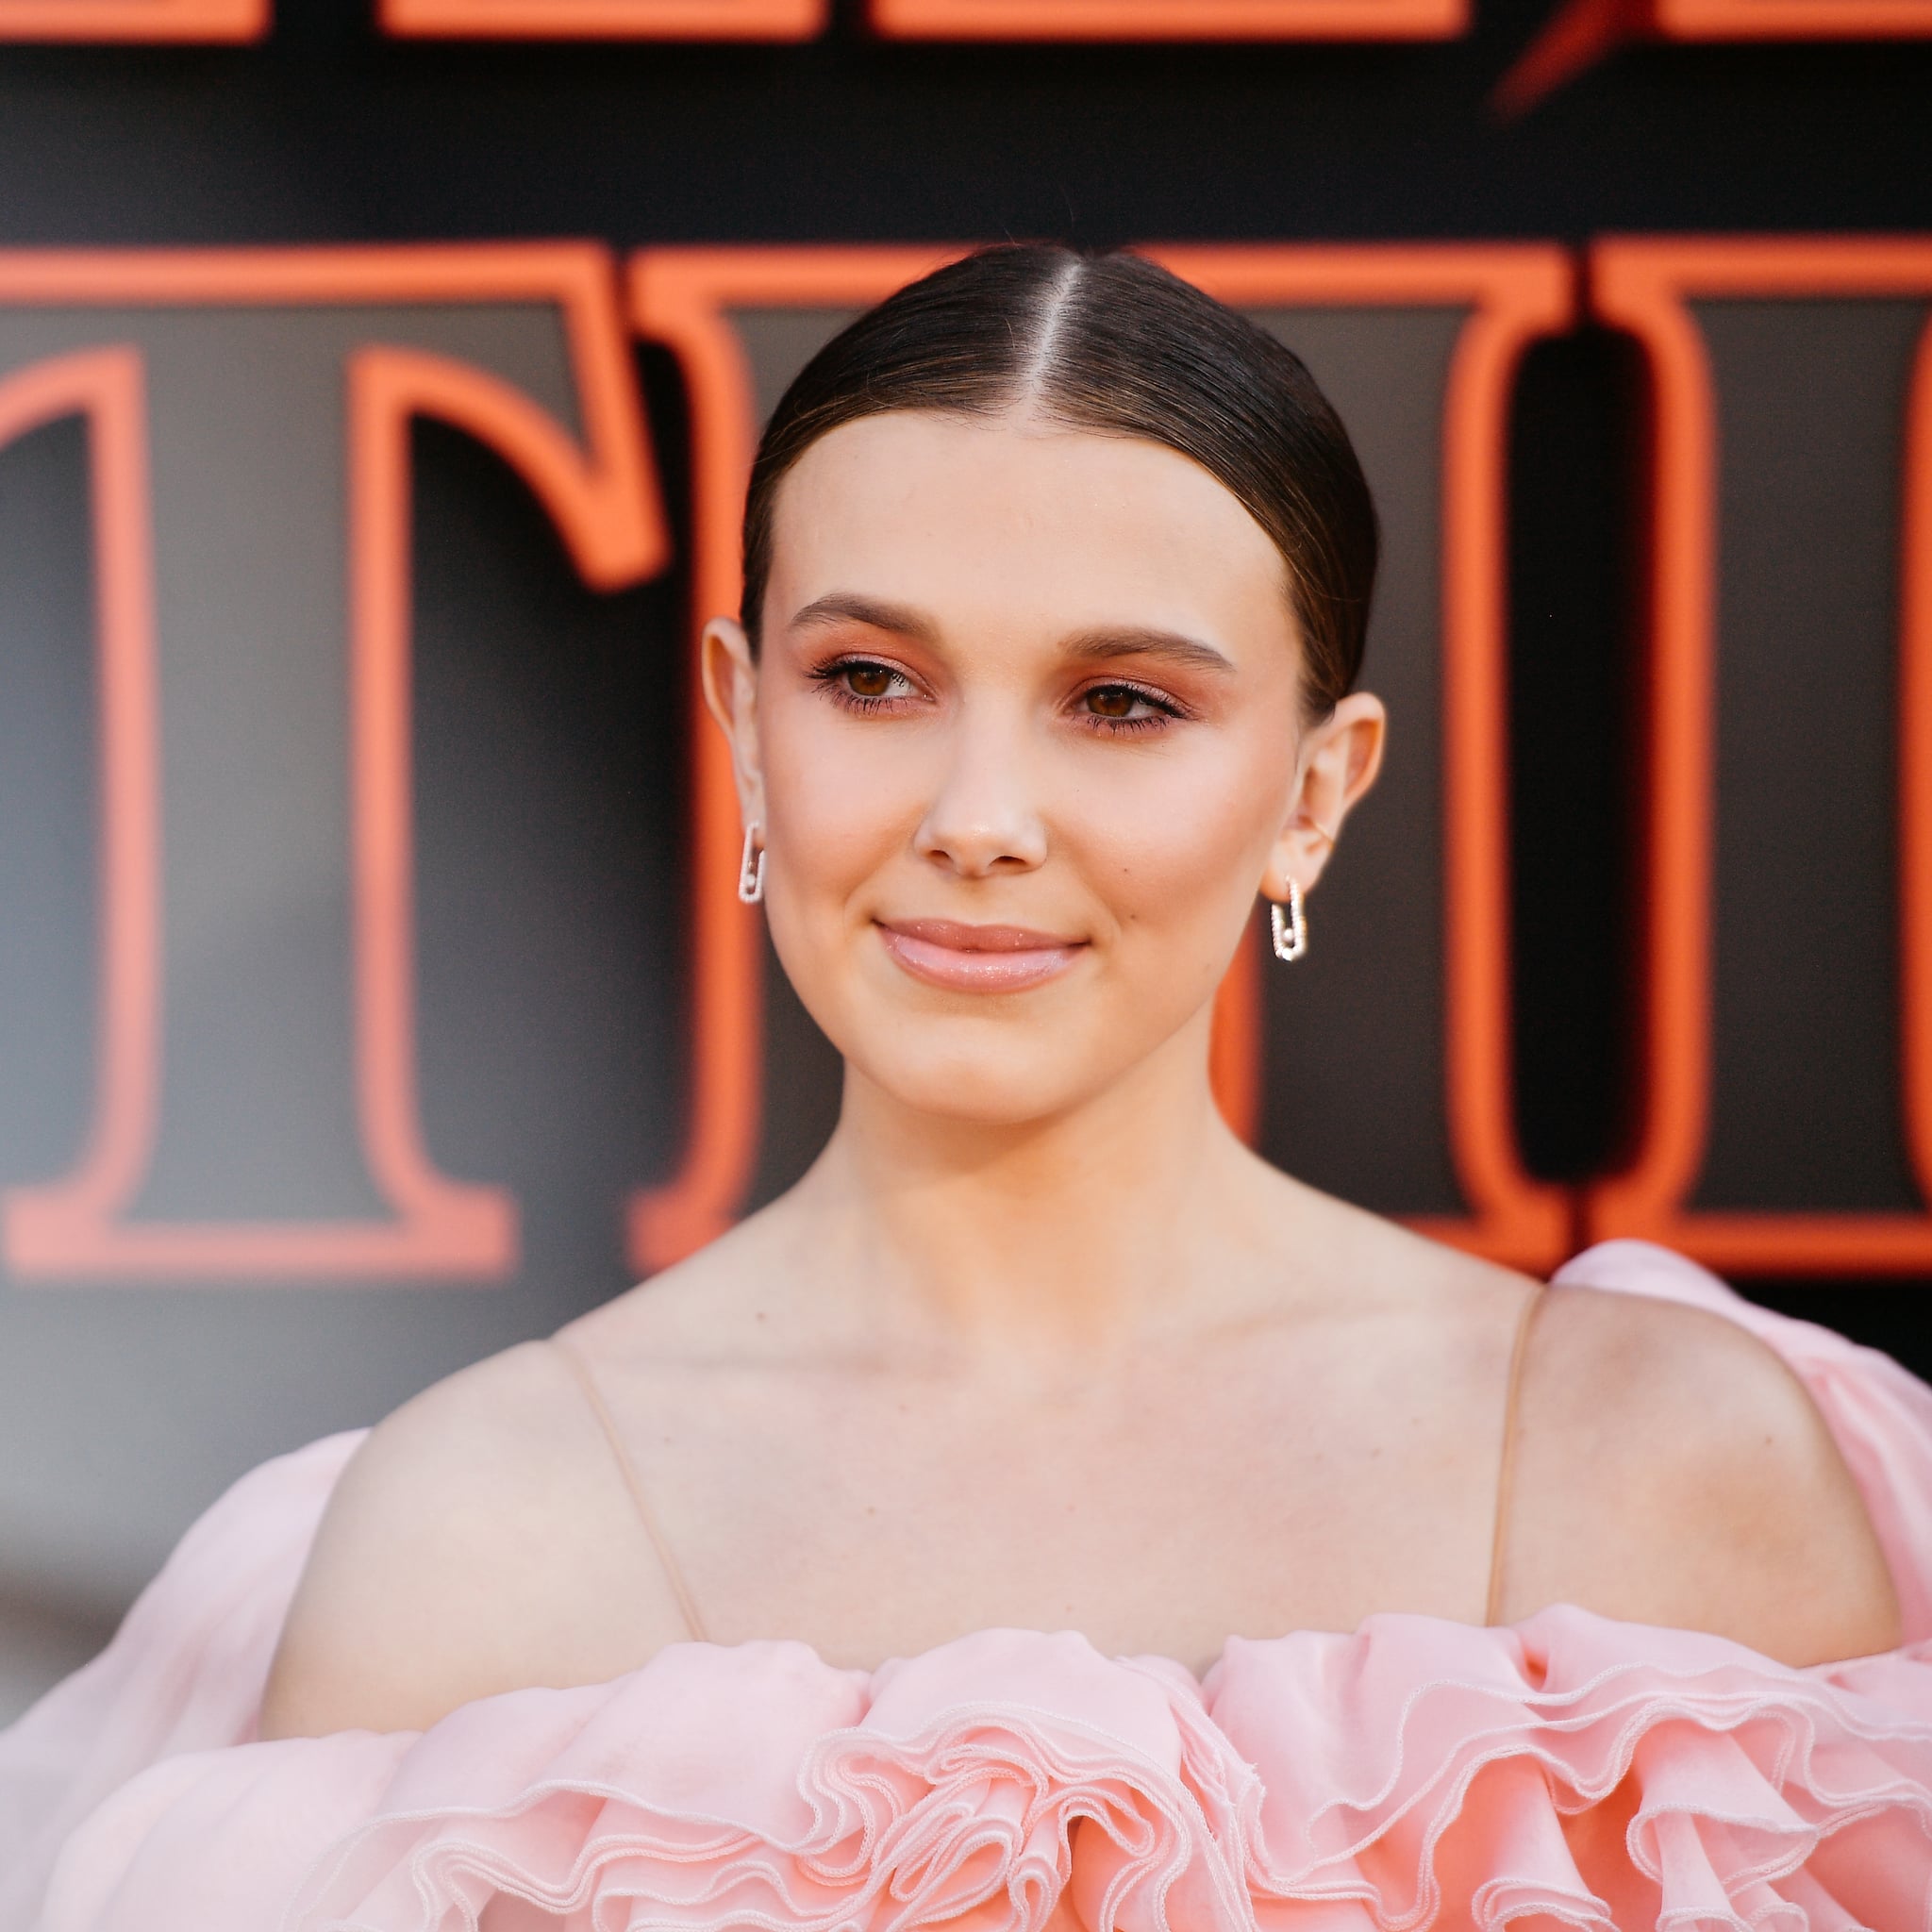 Millie Bobby Brown 11 Facts You Need To Know About Stranger Things Star  Including  Capital